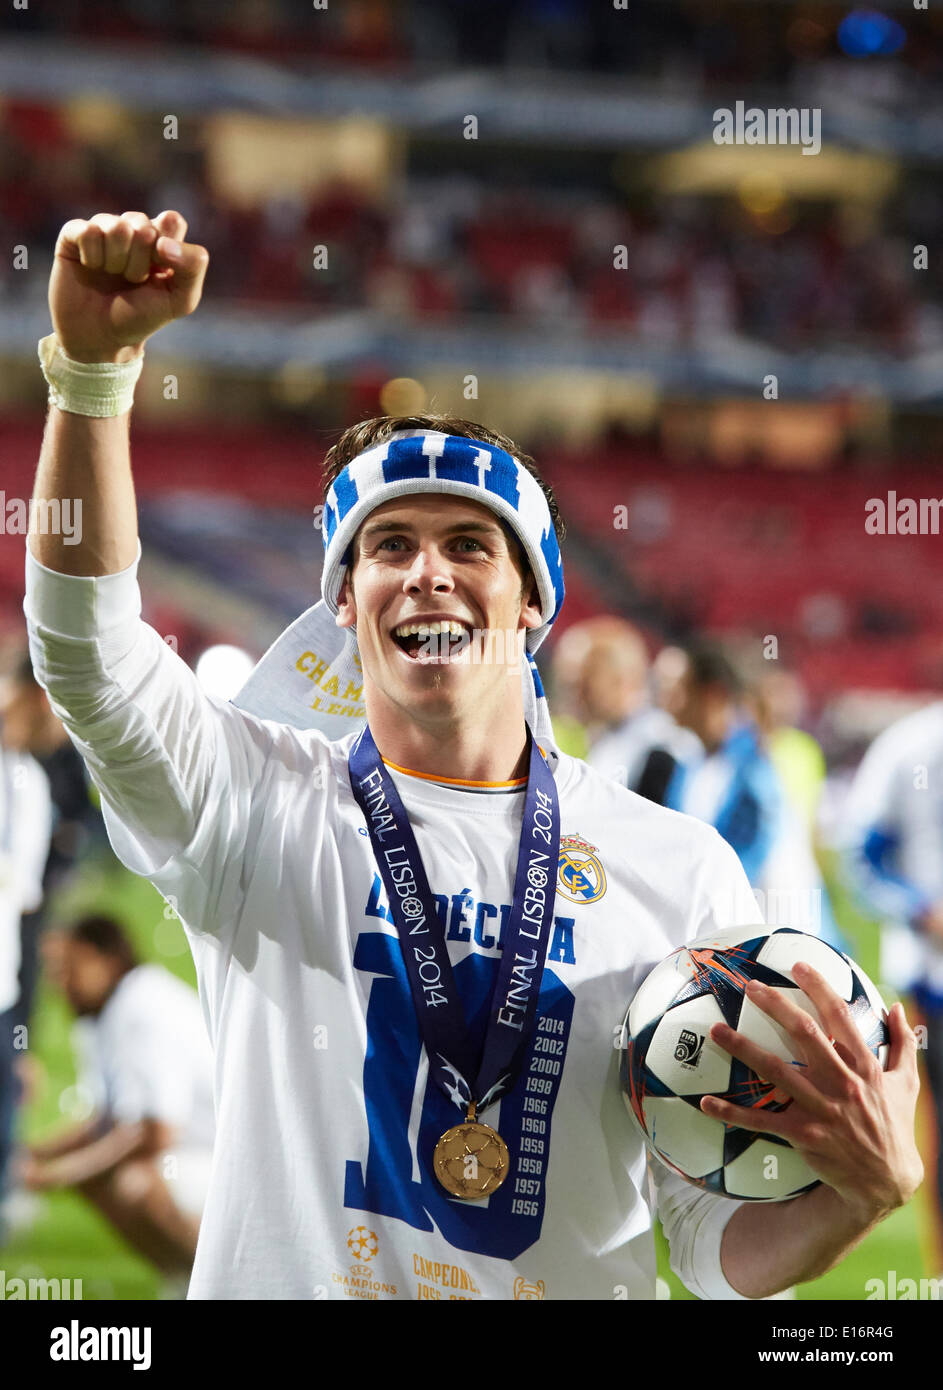 24.05.2014, Lisbon, Portugal. Midfielder Gareth Bale of Real Madrid greets his suppporters after the UEFA Champions League final game between Real Madrid and Atletico Madrid at Sport Lisboa e Benfica Stadium, Lisbon, Portugal Stock Photo